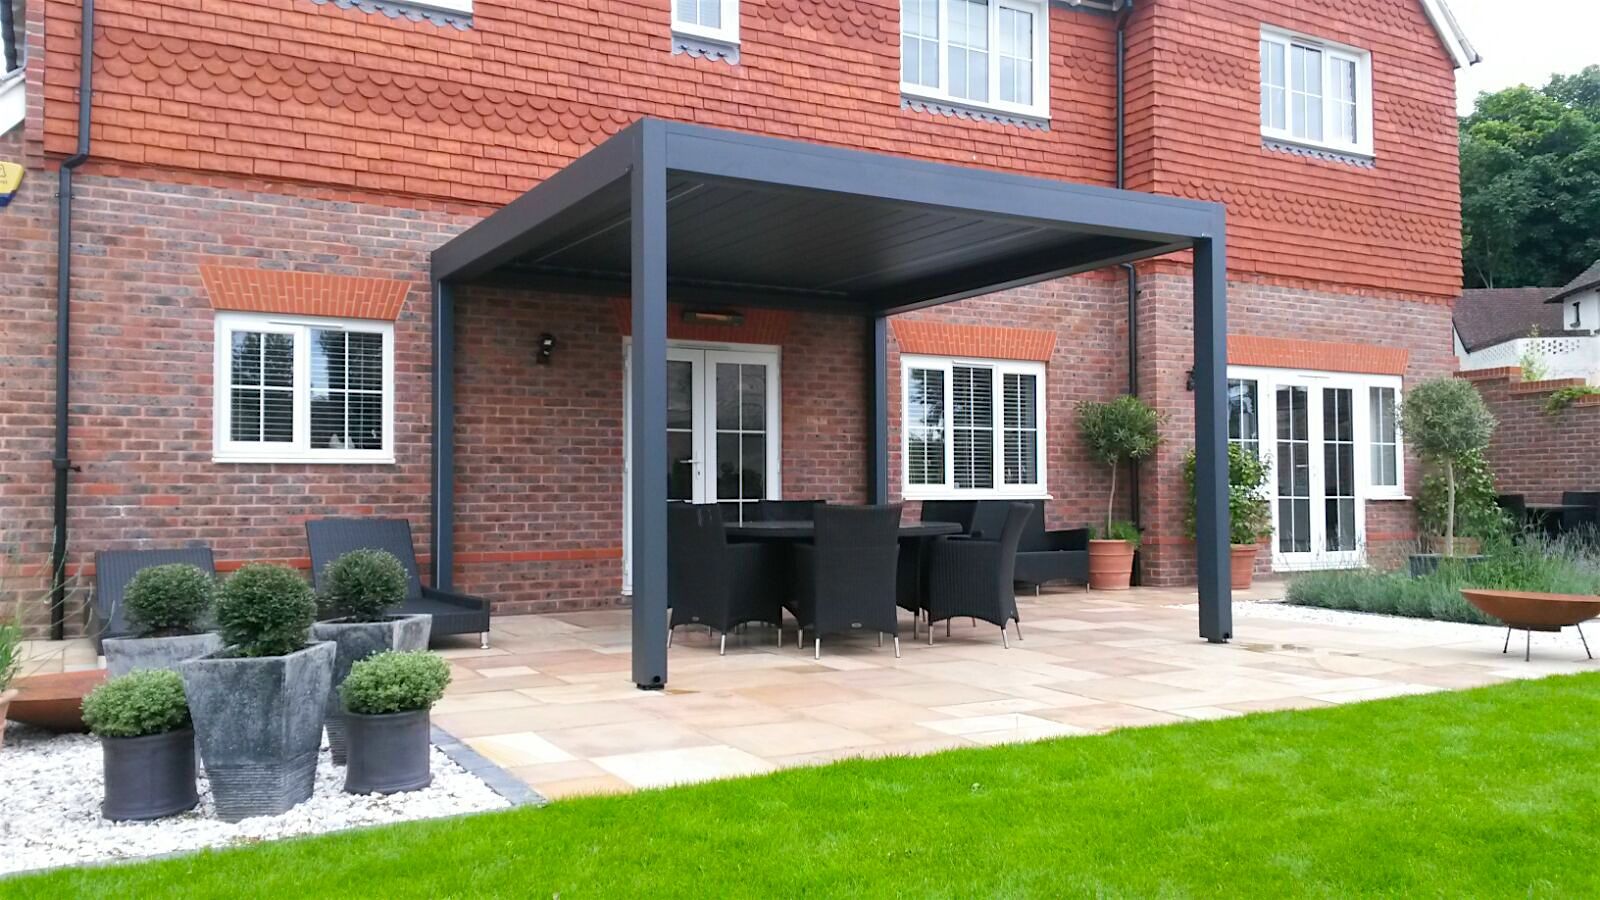 Outdoor Living Pod, Louvered Roof Patio Canopy Installation in Findon, West Sussex. homify Modern garden outdoor living pod,louvered,roof,patio,terrace,canopy,garden,room